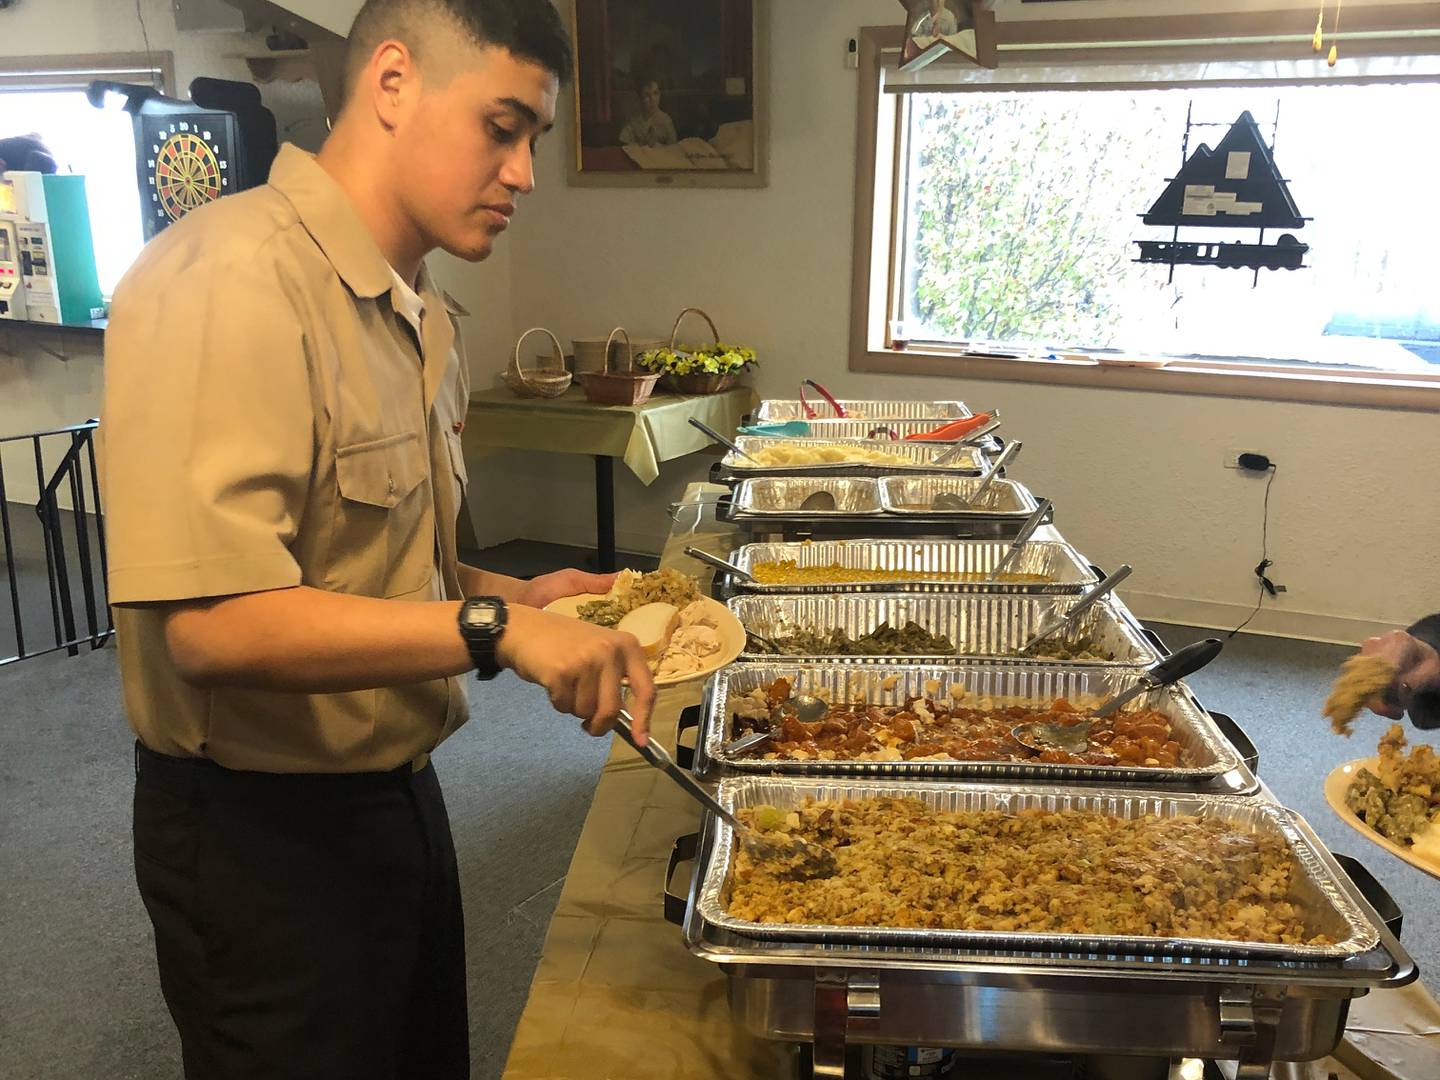 Alex Rebollar, 20, of Austin, Texas, gets seconds on Thursday, Nov. 24, 2022, at the Johnsburg Moose Lodge 691. He was one of 45 recruits from the Naval Station Great Lakes' Recruit Training Command who spent their Thanksgiving at the Moose lodge.